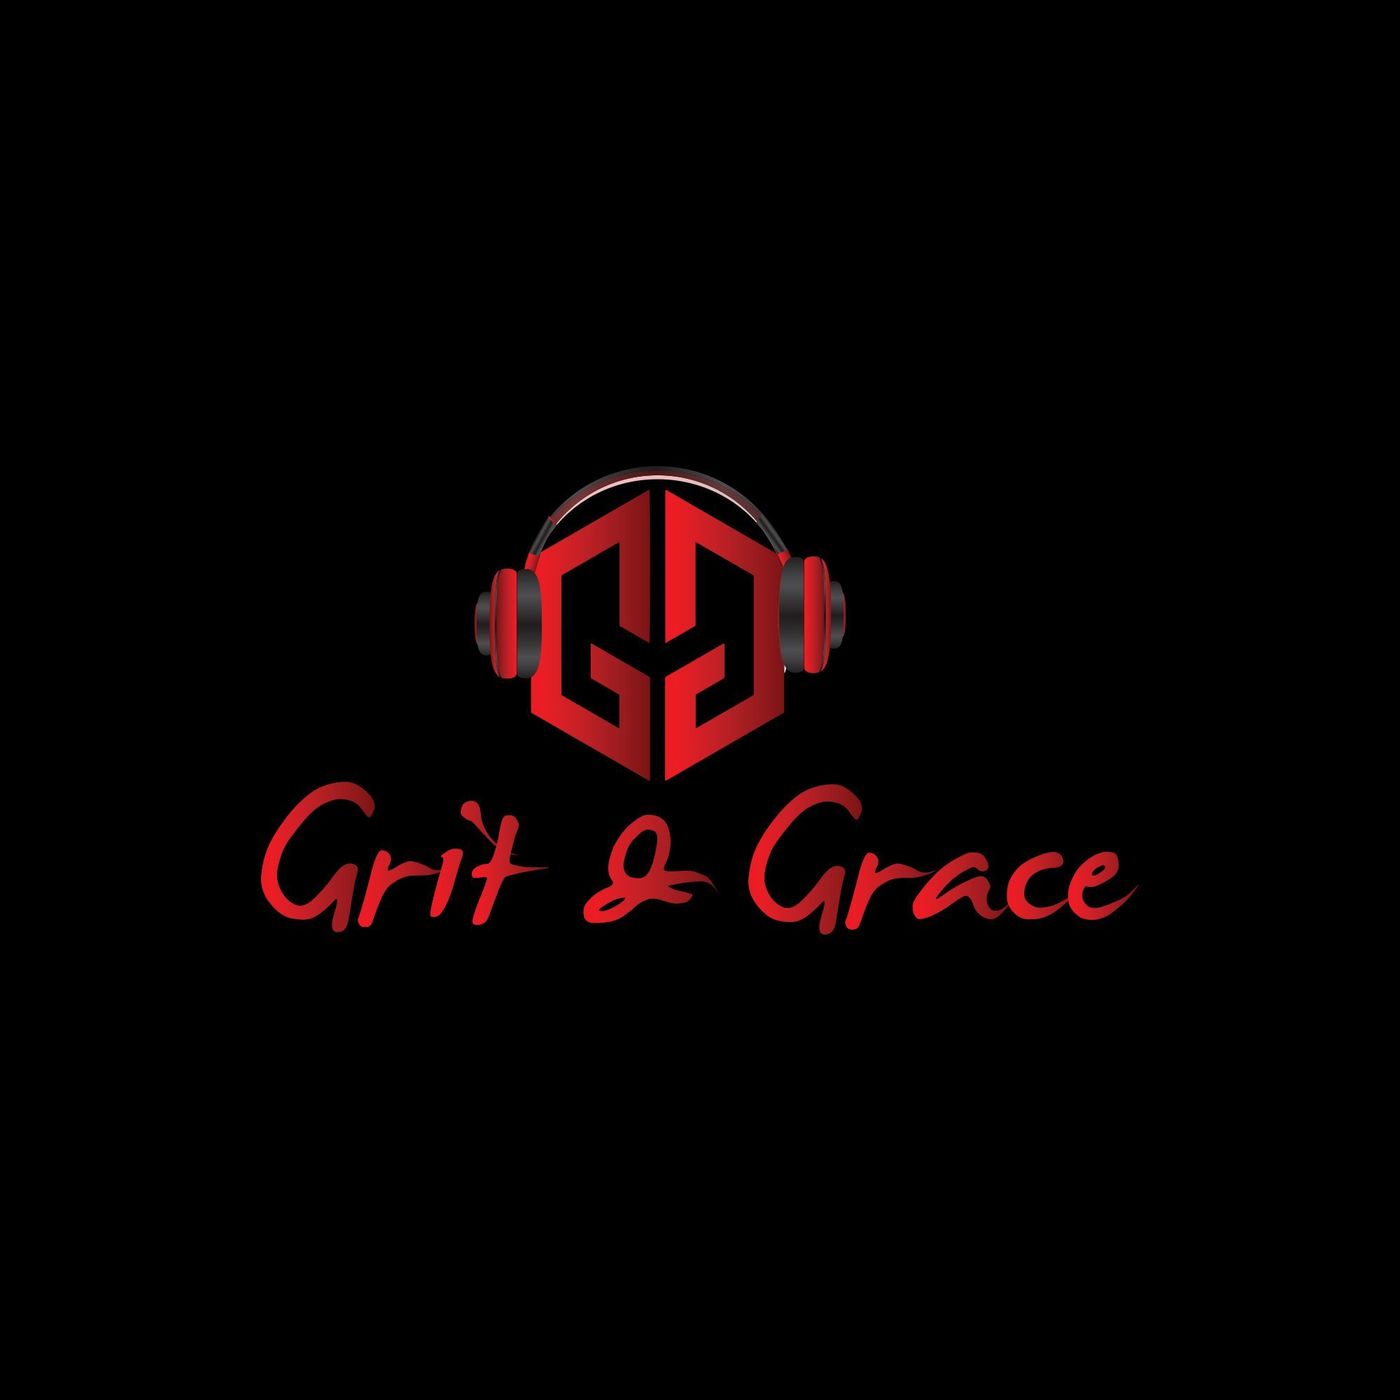 Grit and Grace: Building Community Partnerships is Critical to Your Business Growth